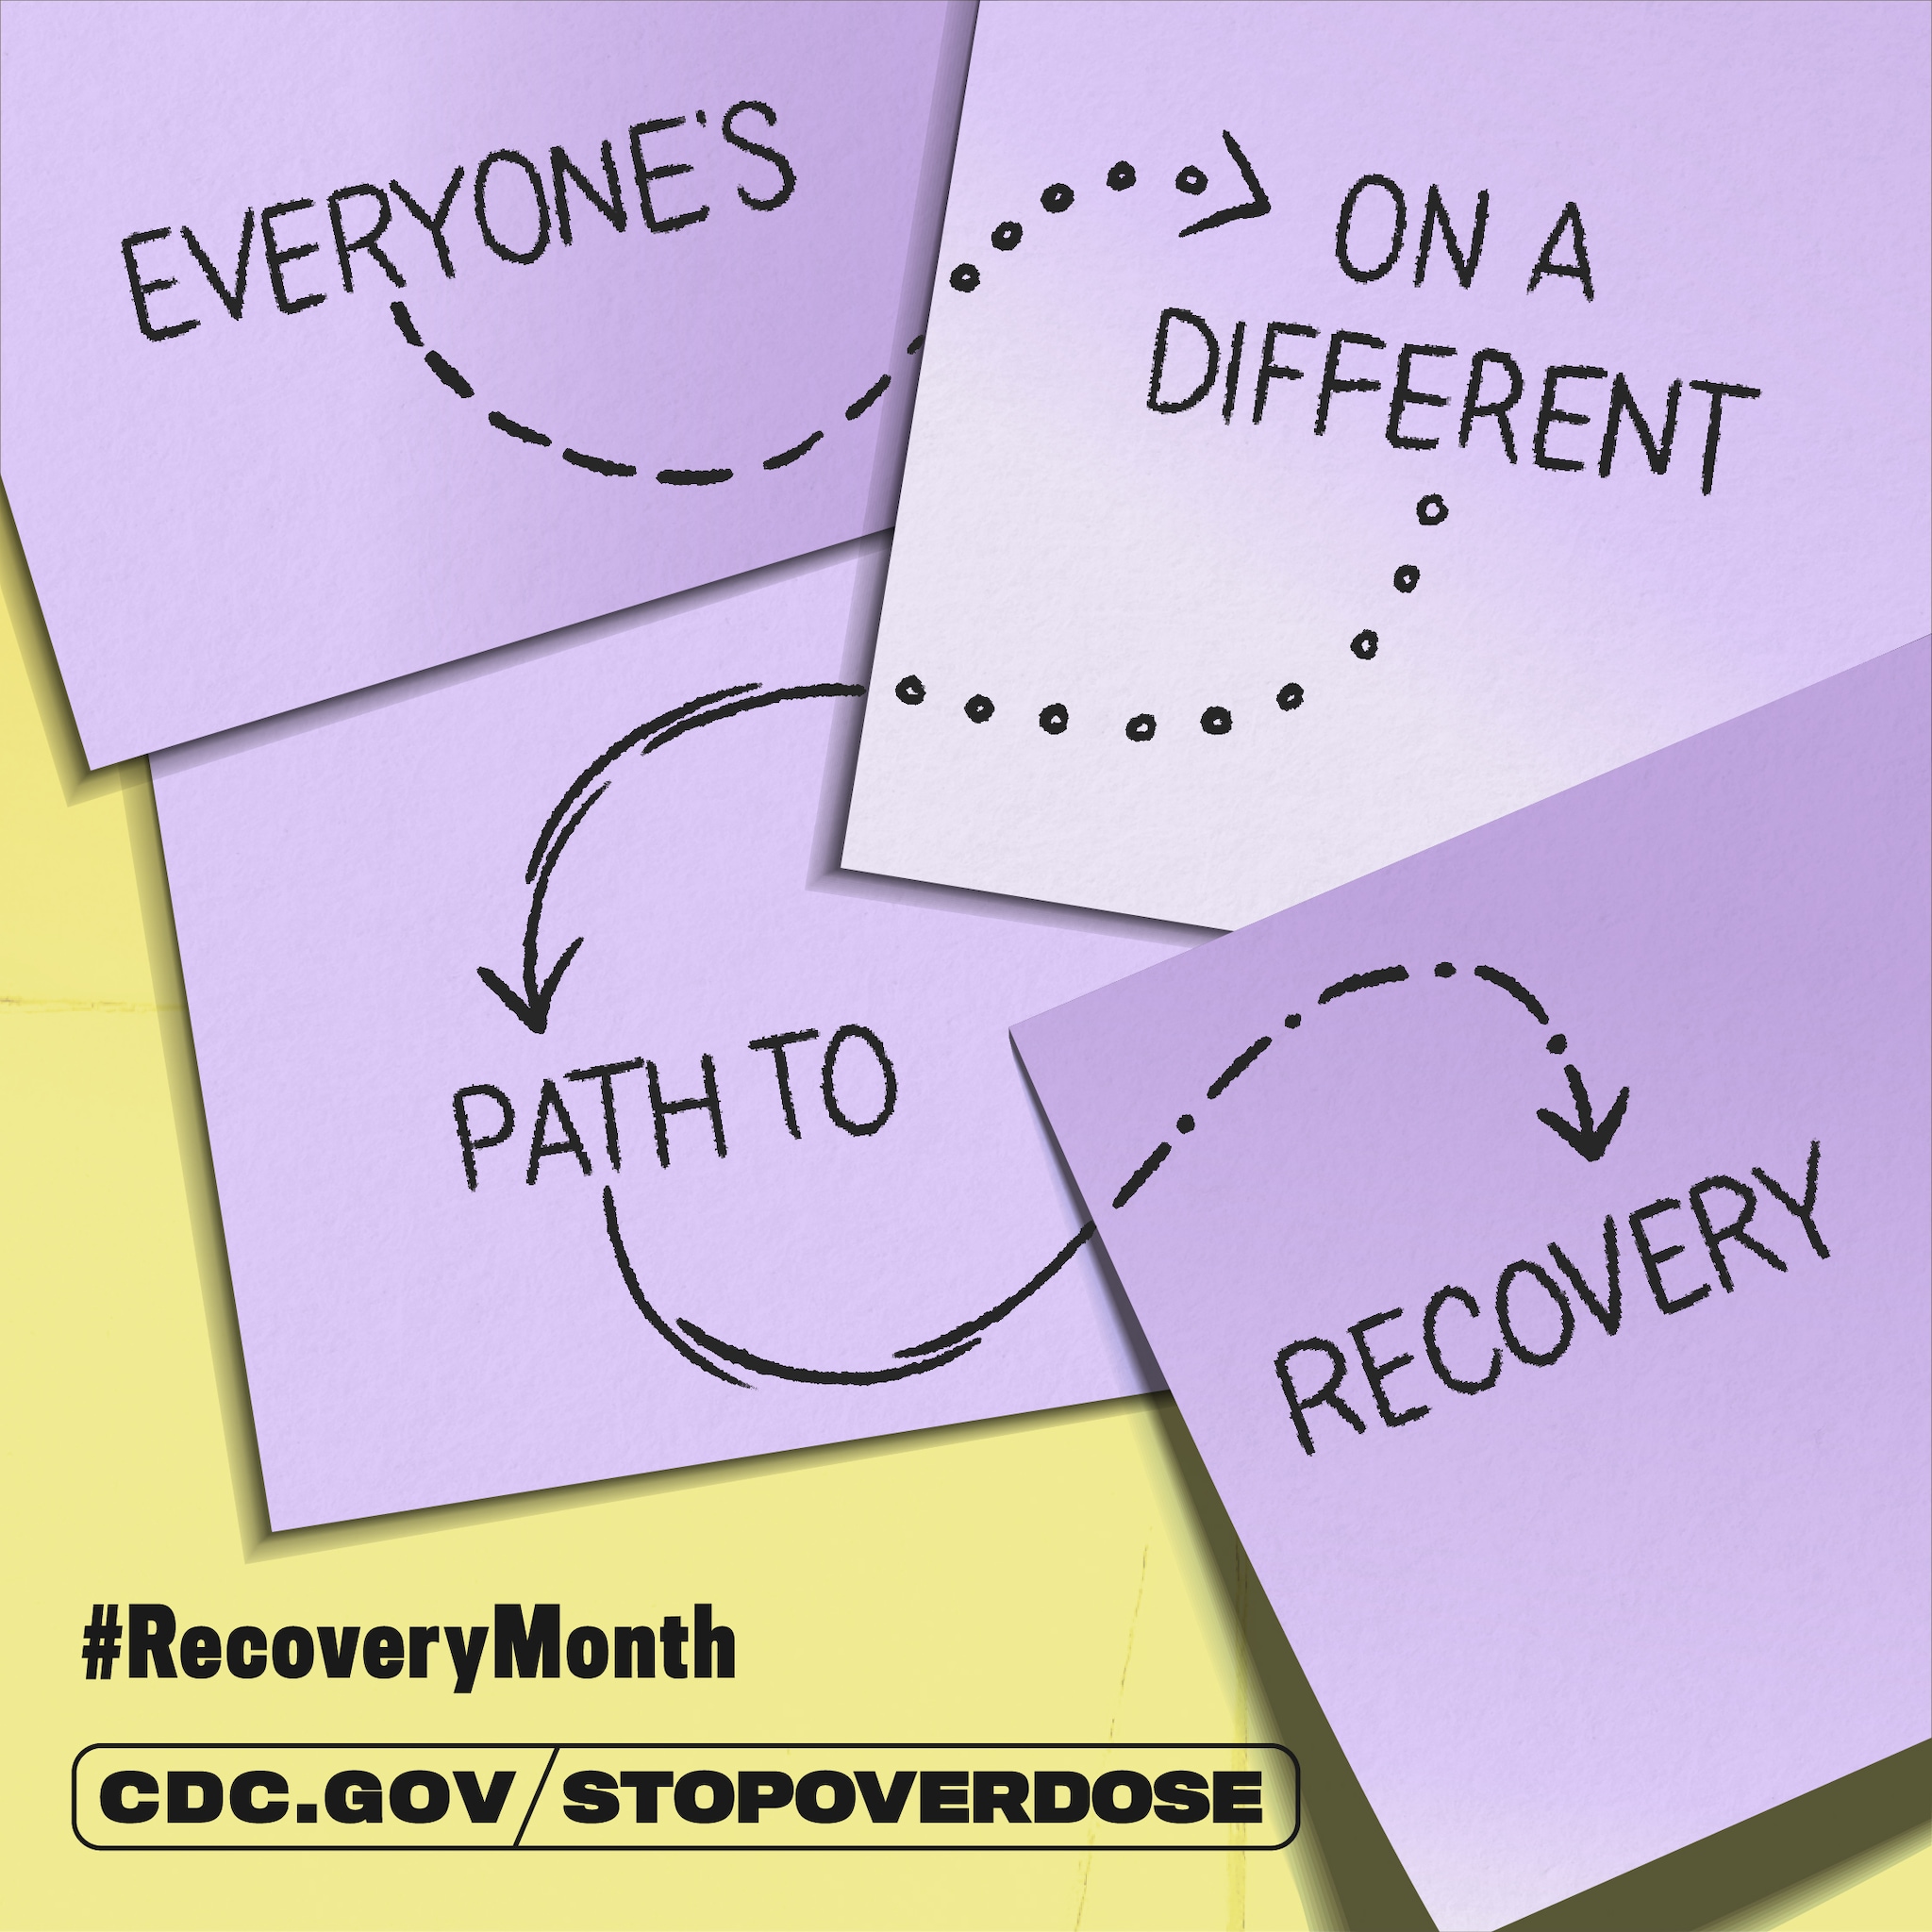 Everyone is on a different path to recovery.